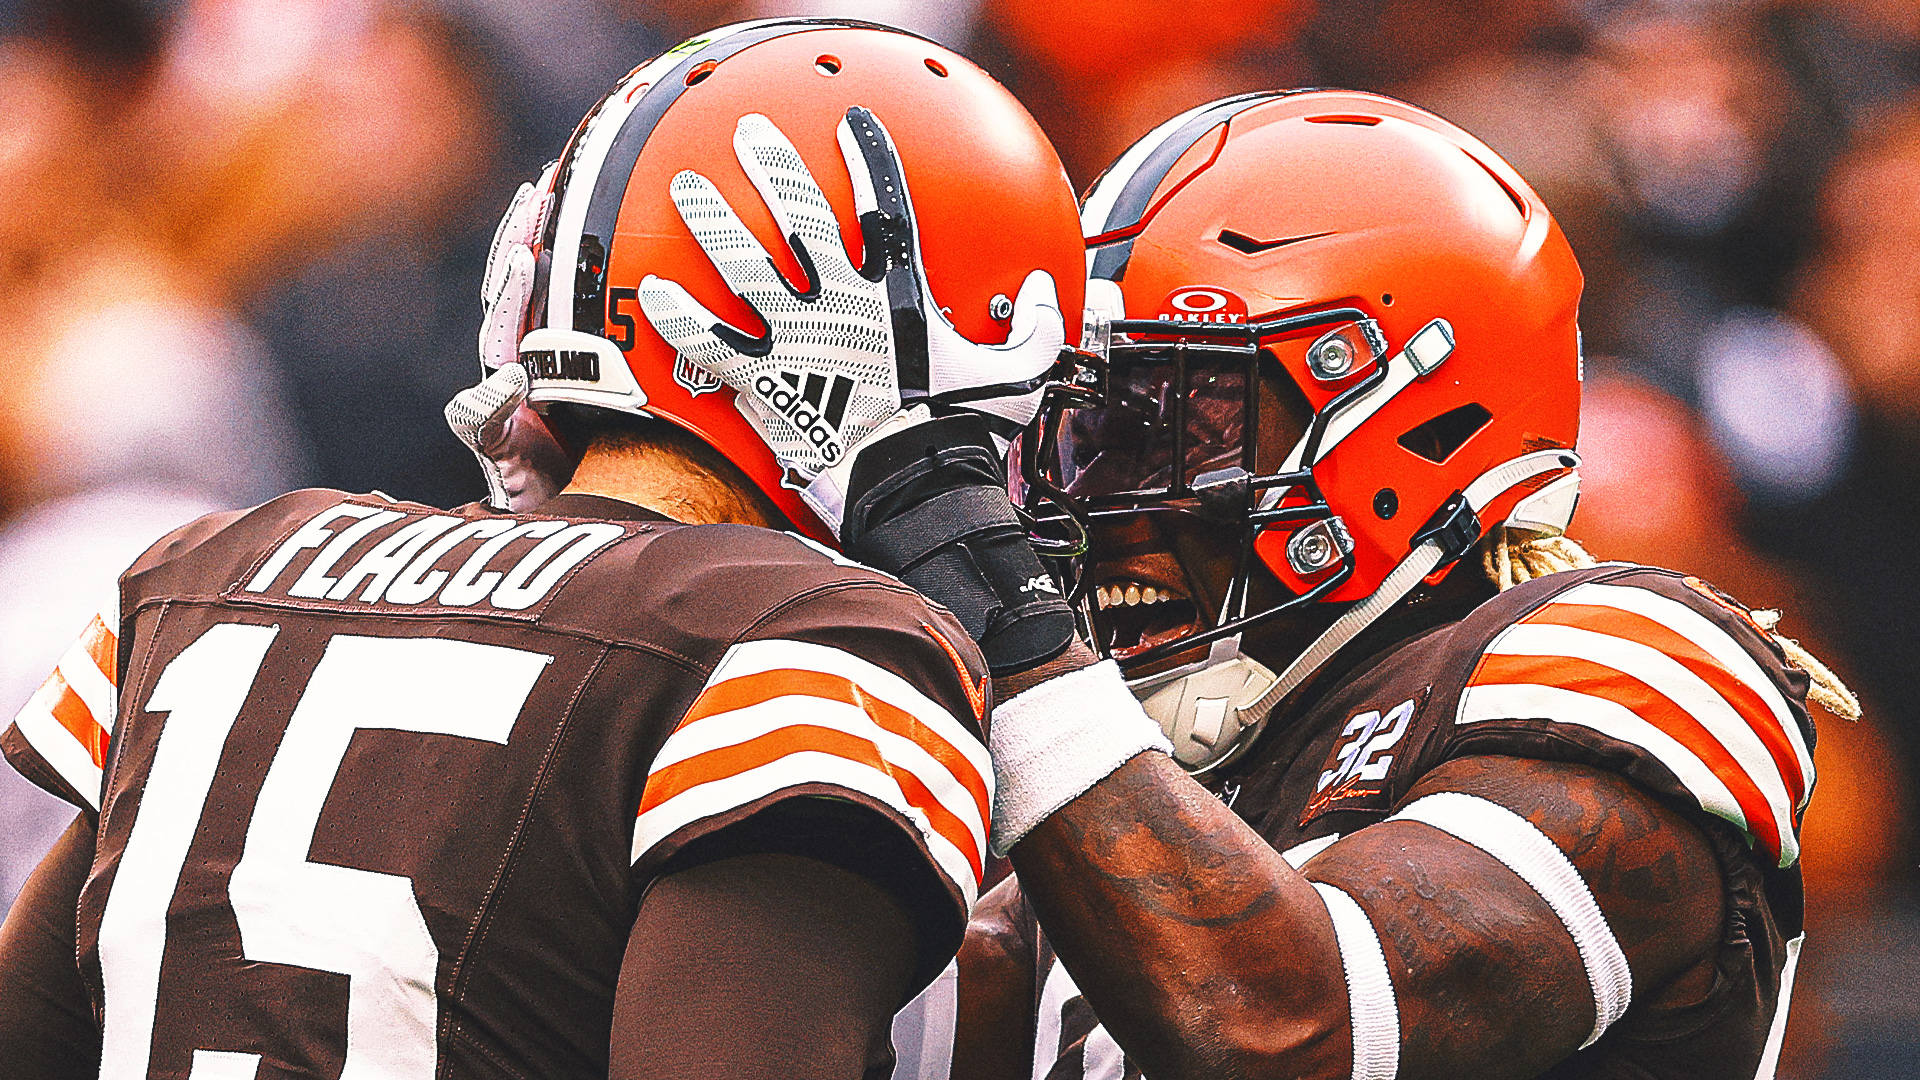 Browns prove they’re a respectable AFC contender with Joe Flacco in win over Jaguars